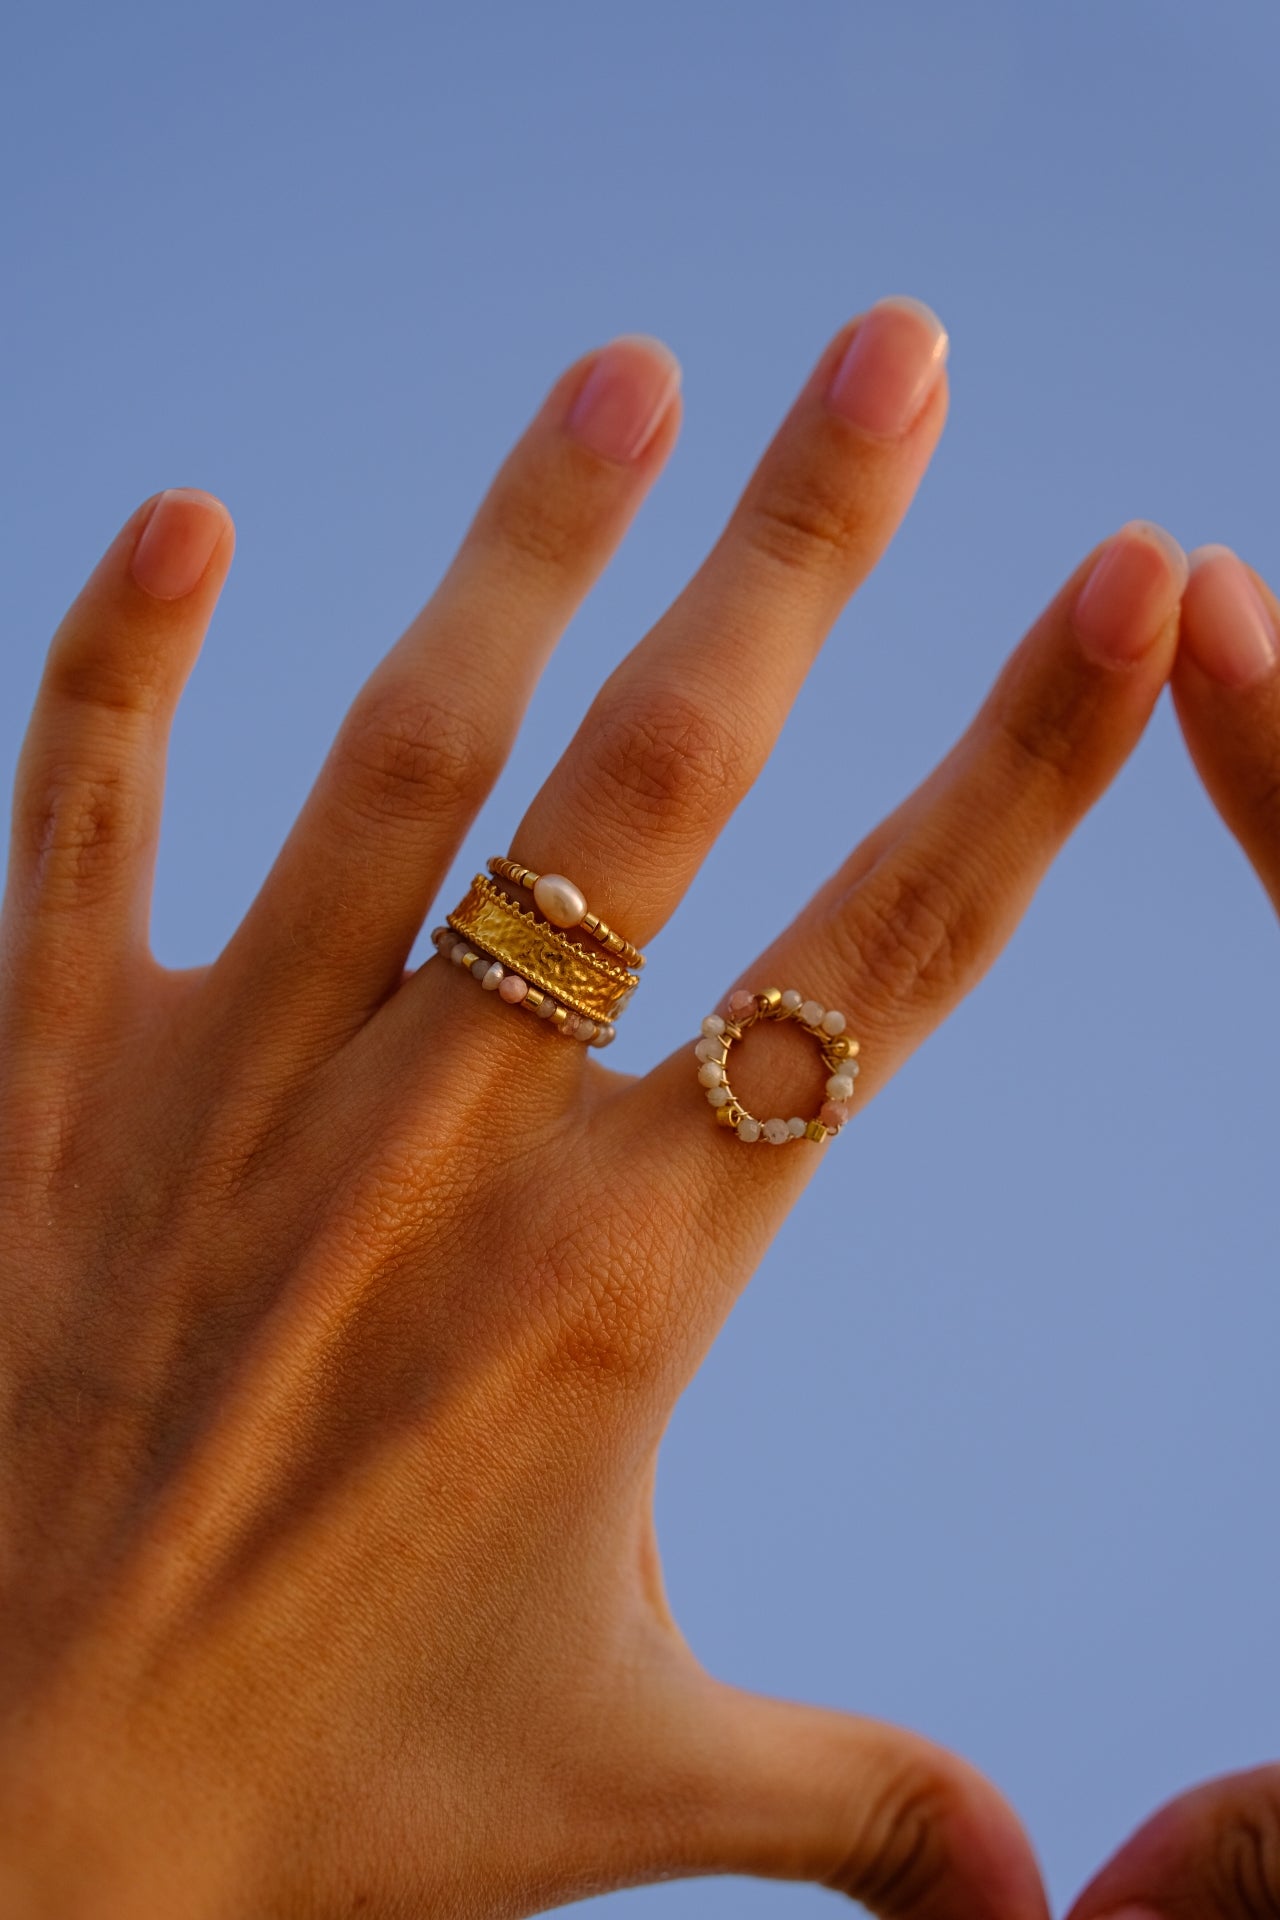 “World” ring (of your choice)